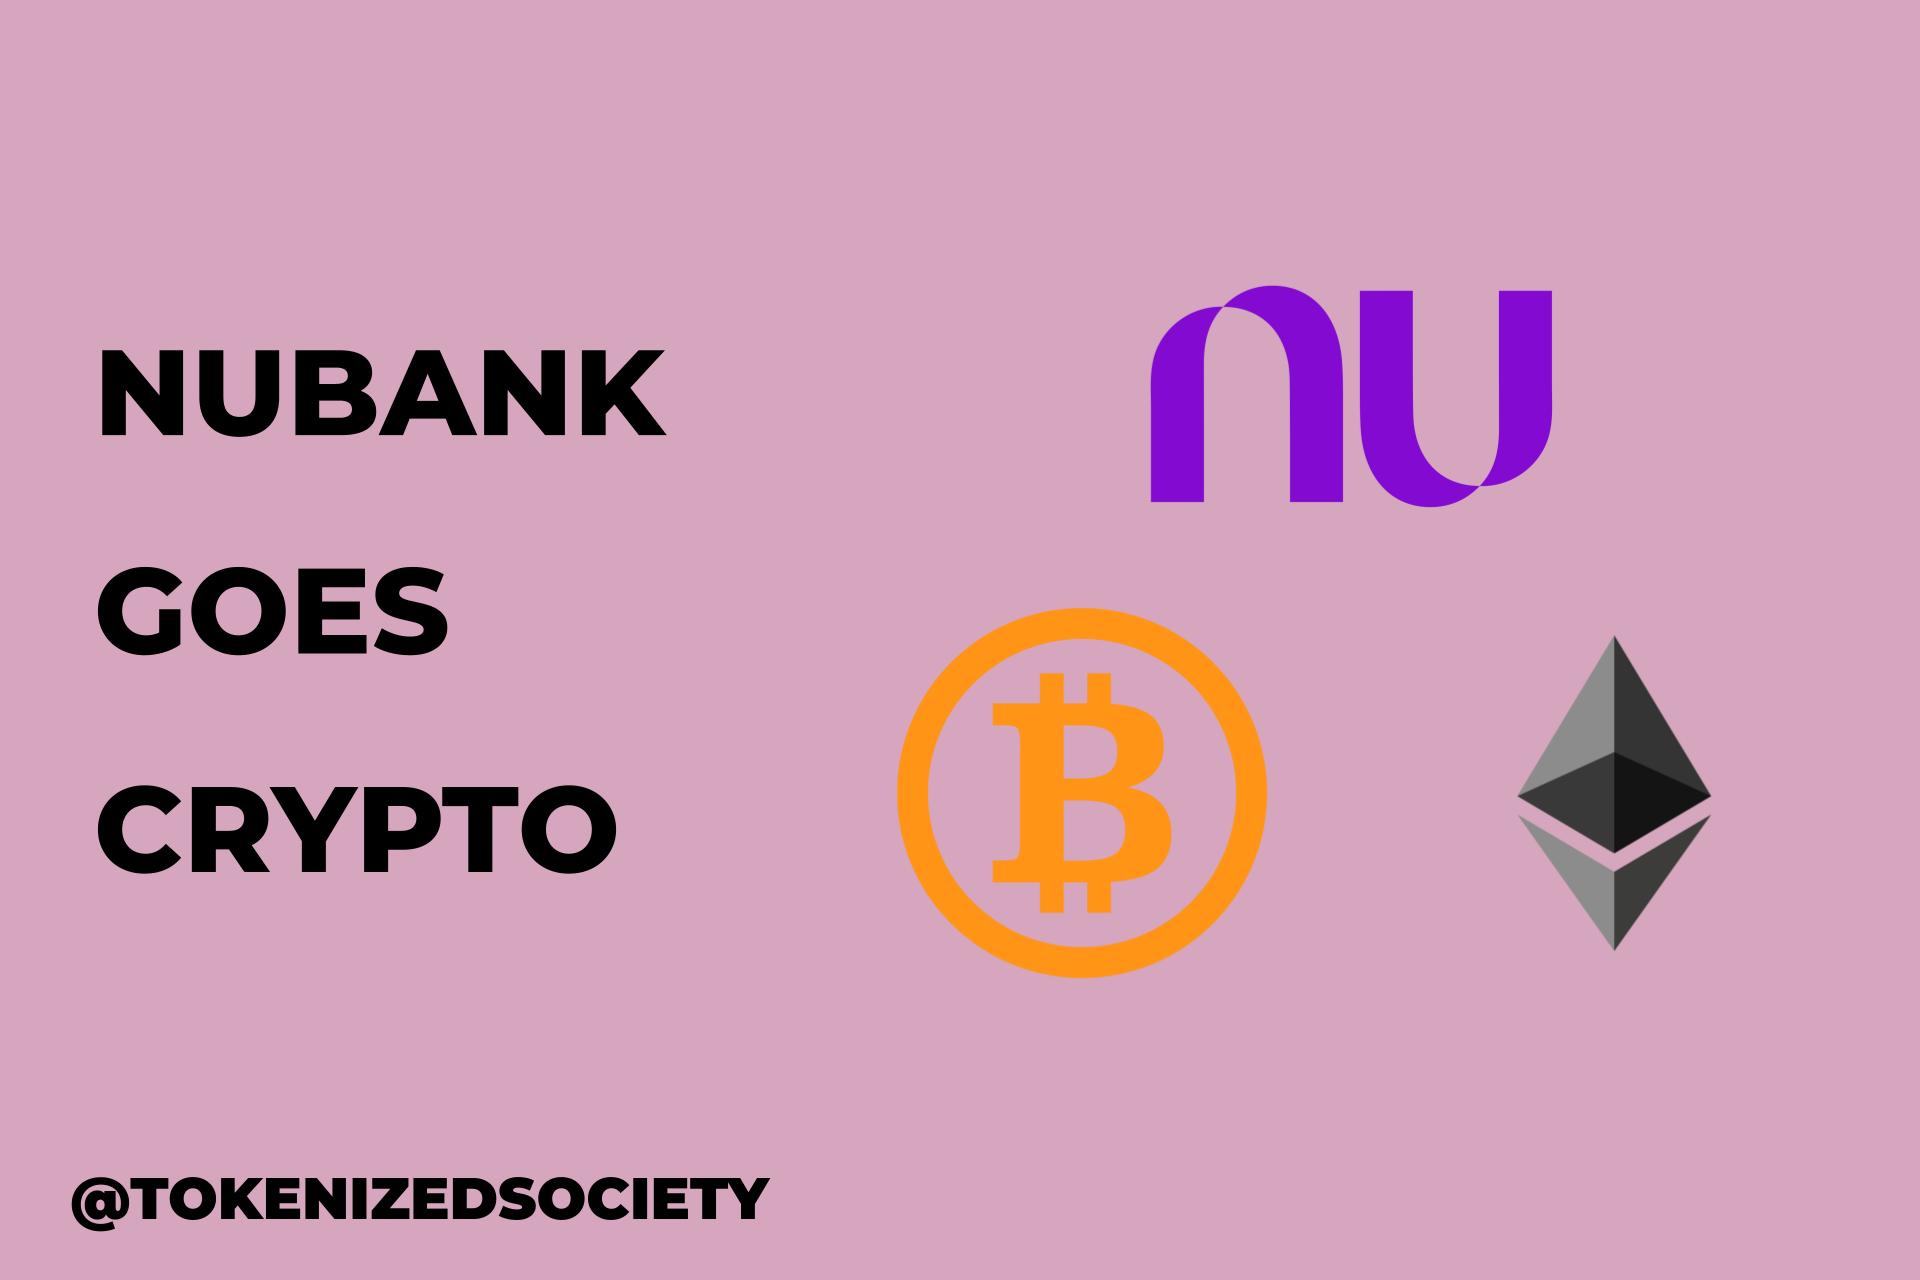 @tokenizedsociety/signs-of-adoption-brazil-s-largest-digital-bank-launches-crypto-service